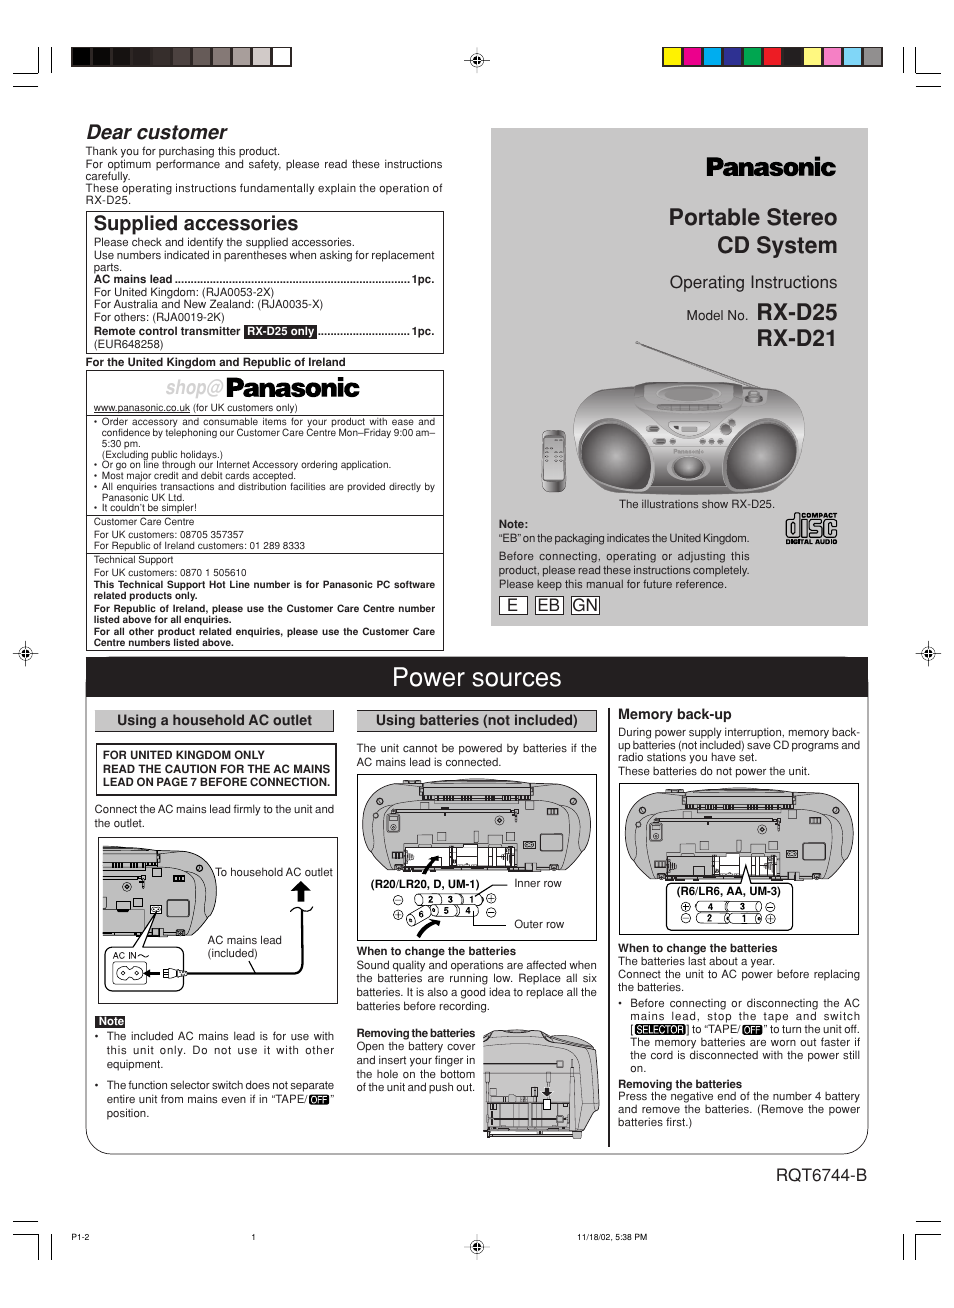 Panasonic RX-D21 User Manual | 8 pages